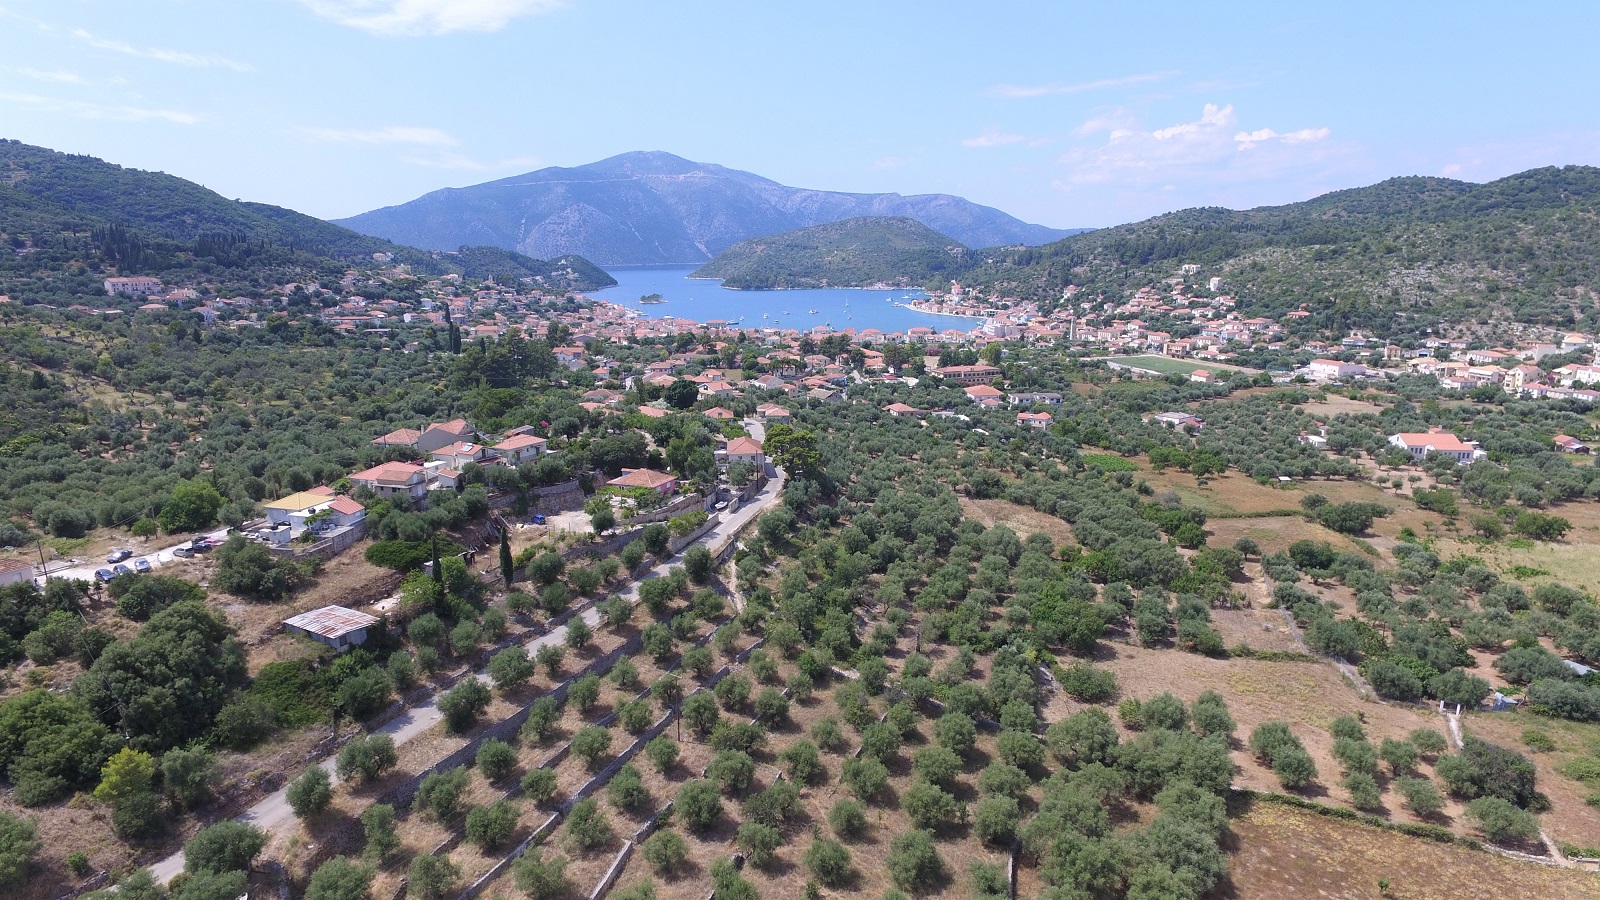 Terrain and landscape of land for sale on Ithaca Greece, Vathi